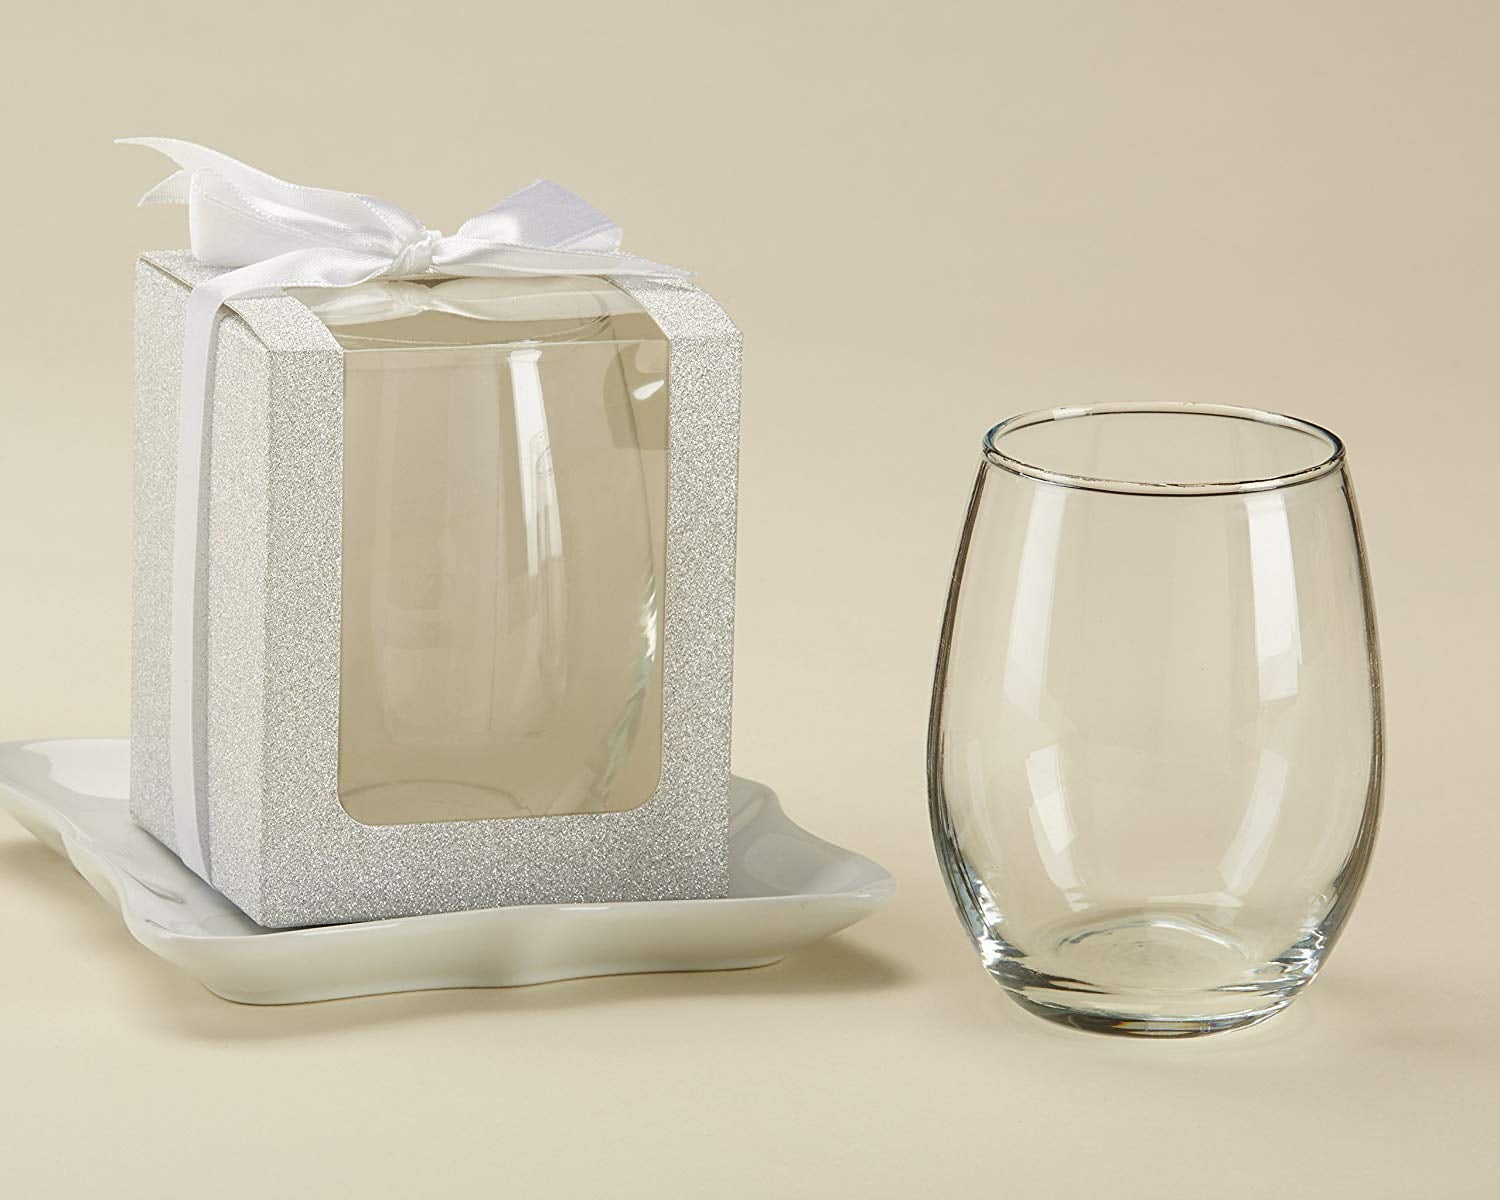 Ships Flat Favor Boxes 24 pieces Works with Stemless 9 Ounce Favors